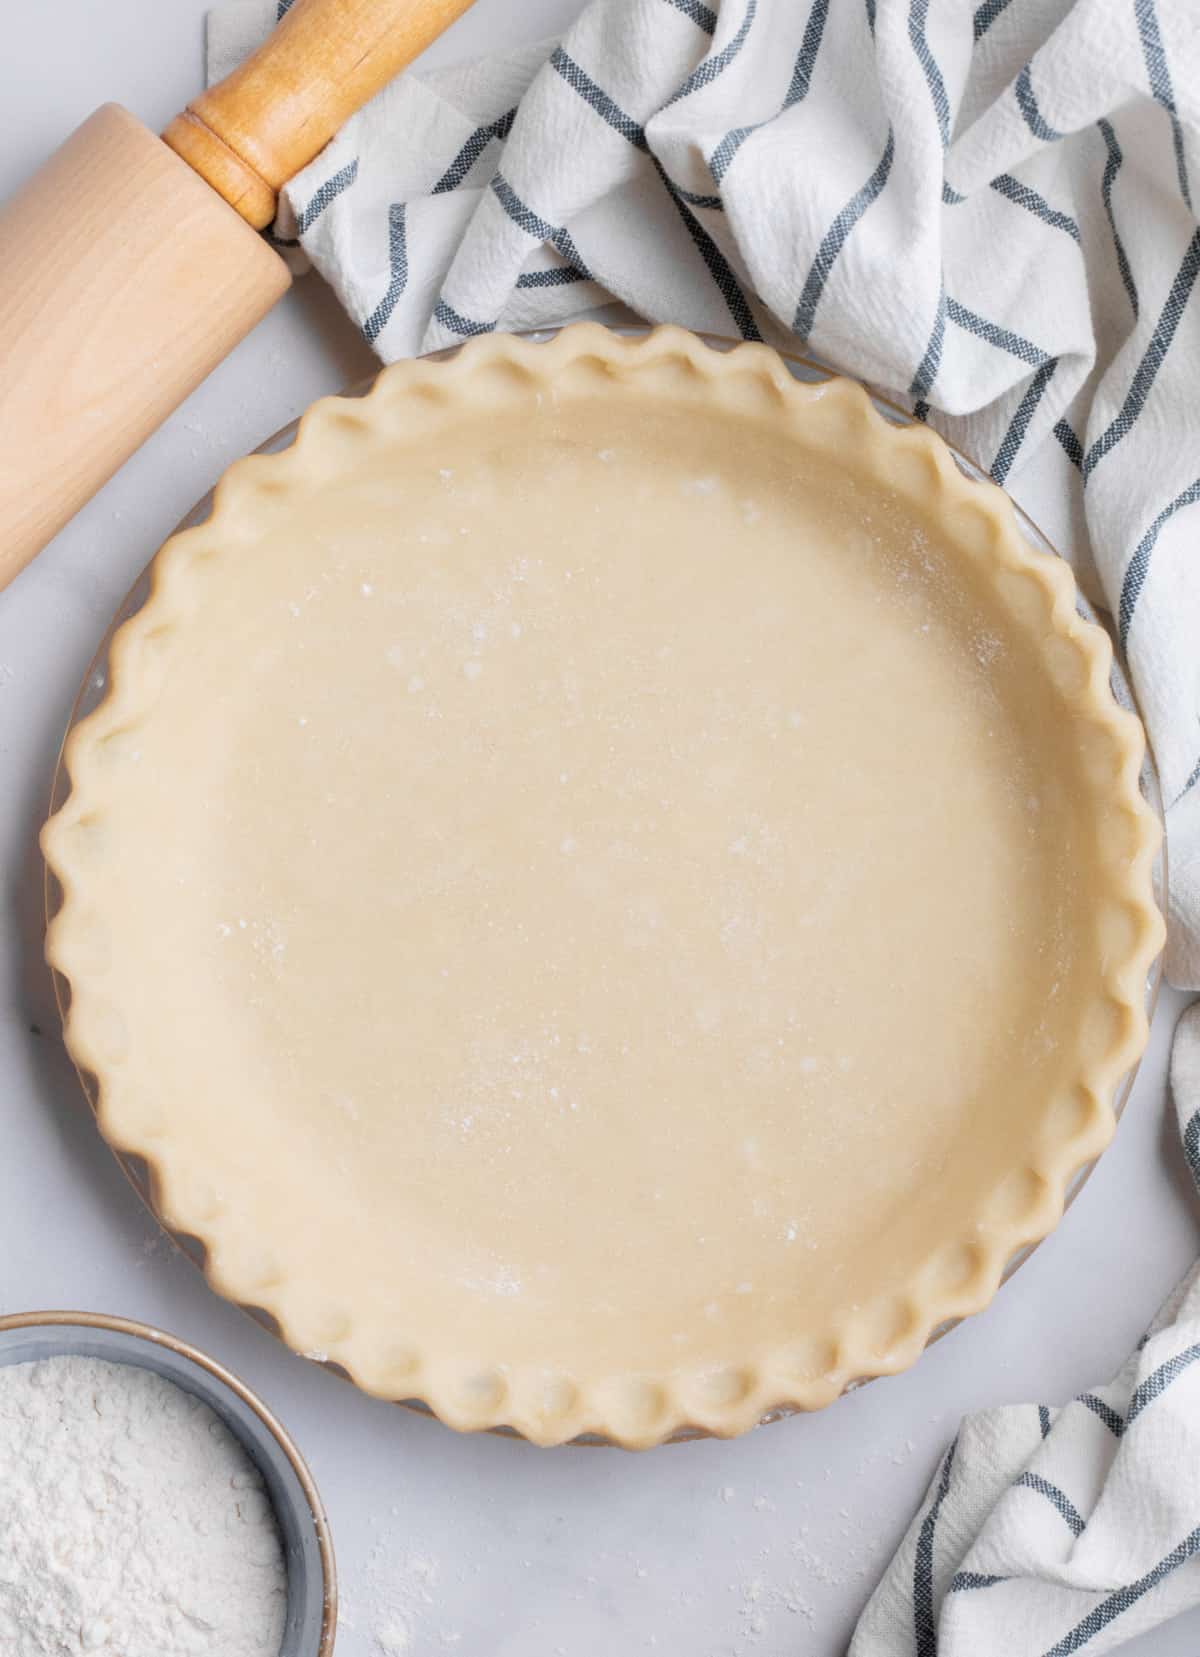 Vegan pie crust dough with crimped edges in a glass pie dish with a small bowl of flour, a rolling pin and a kitchen towel nearby.